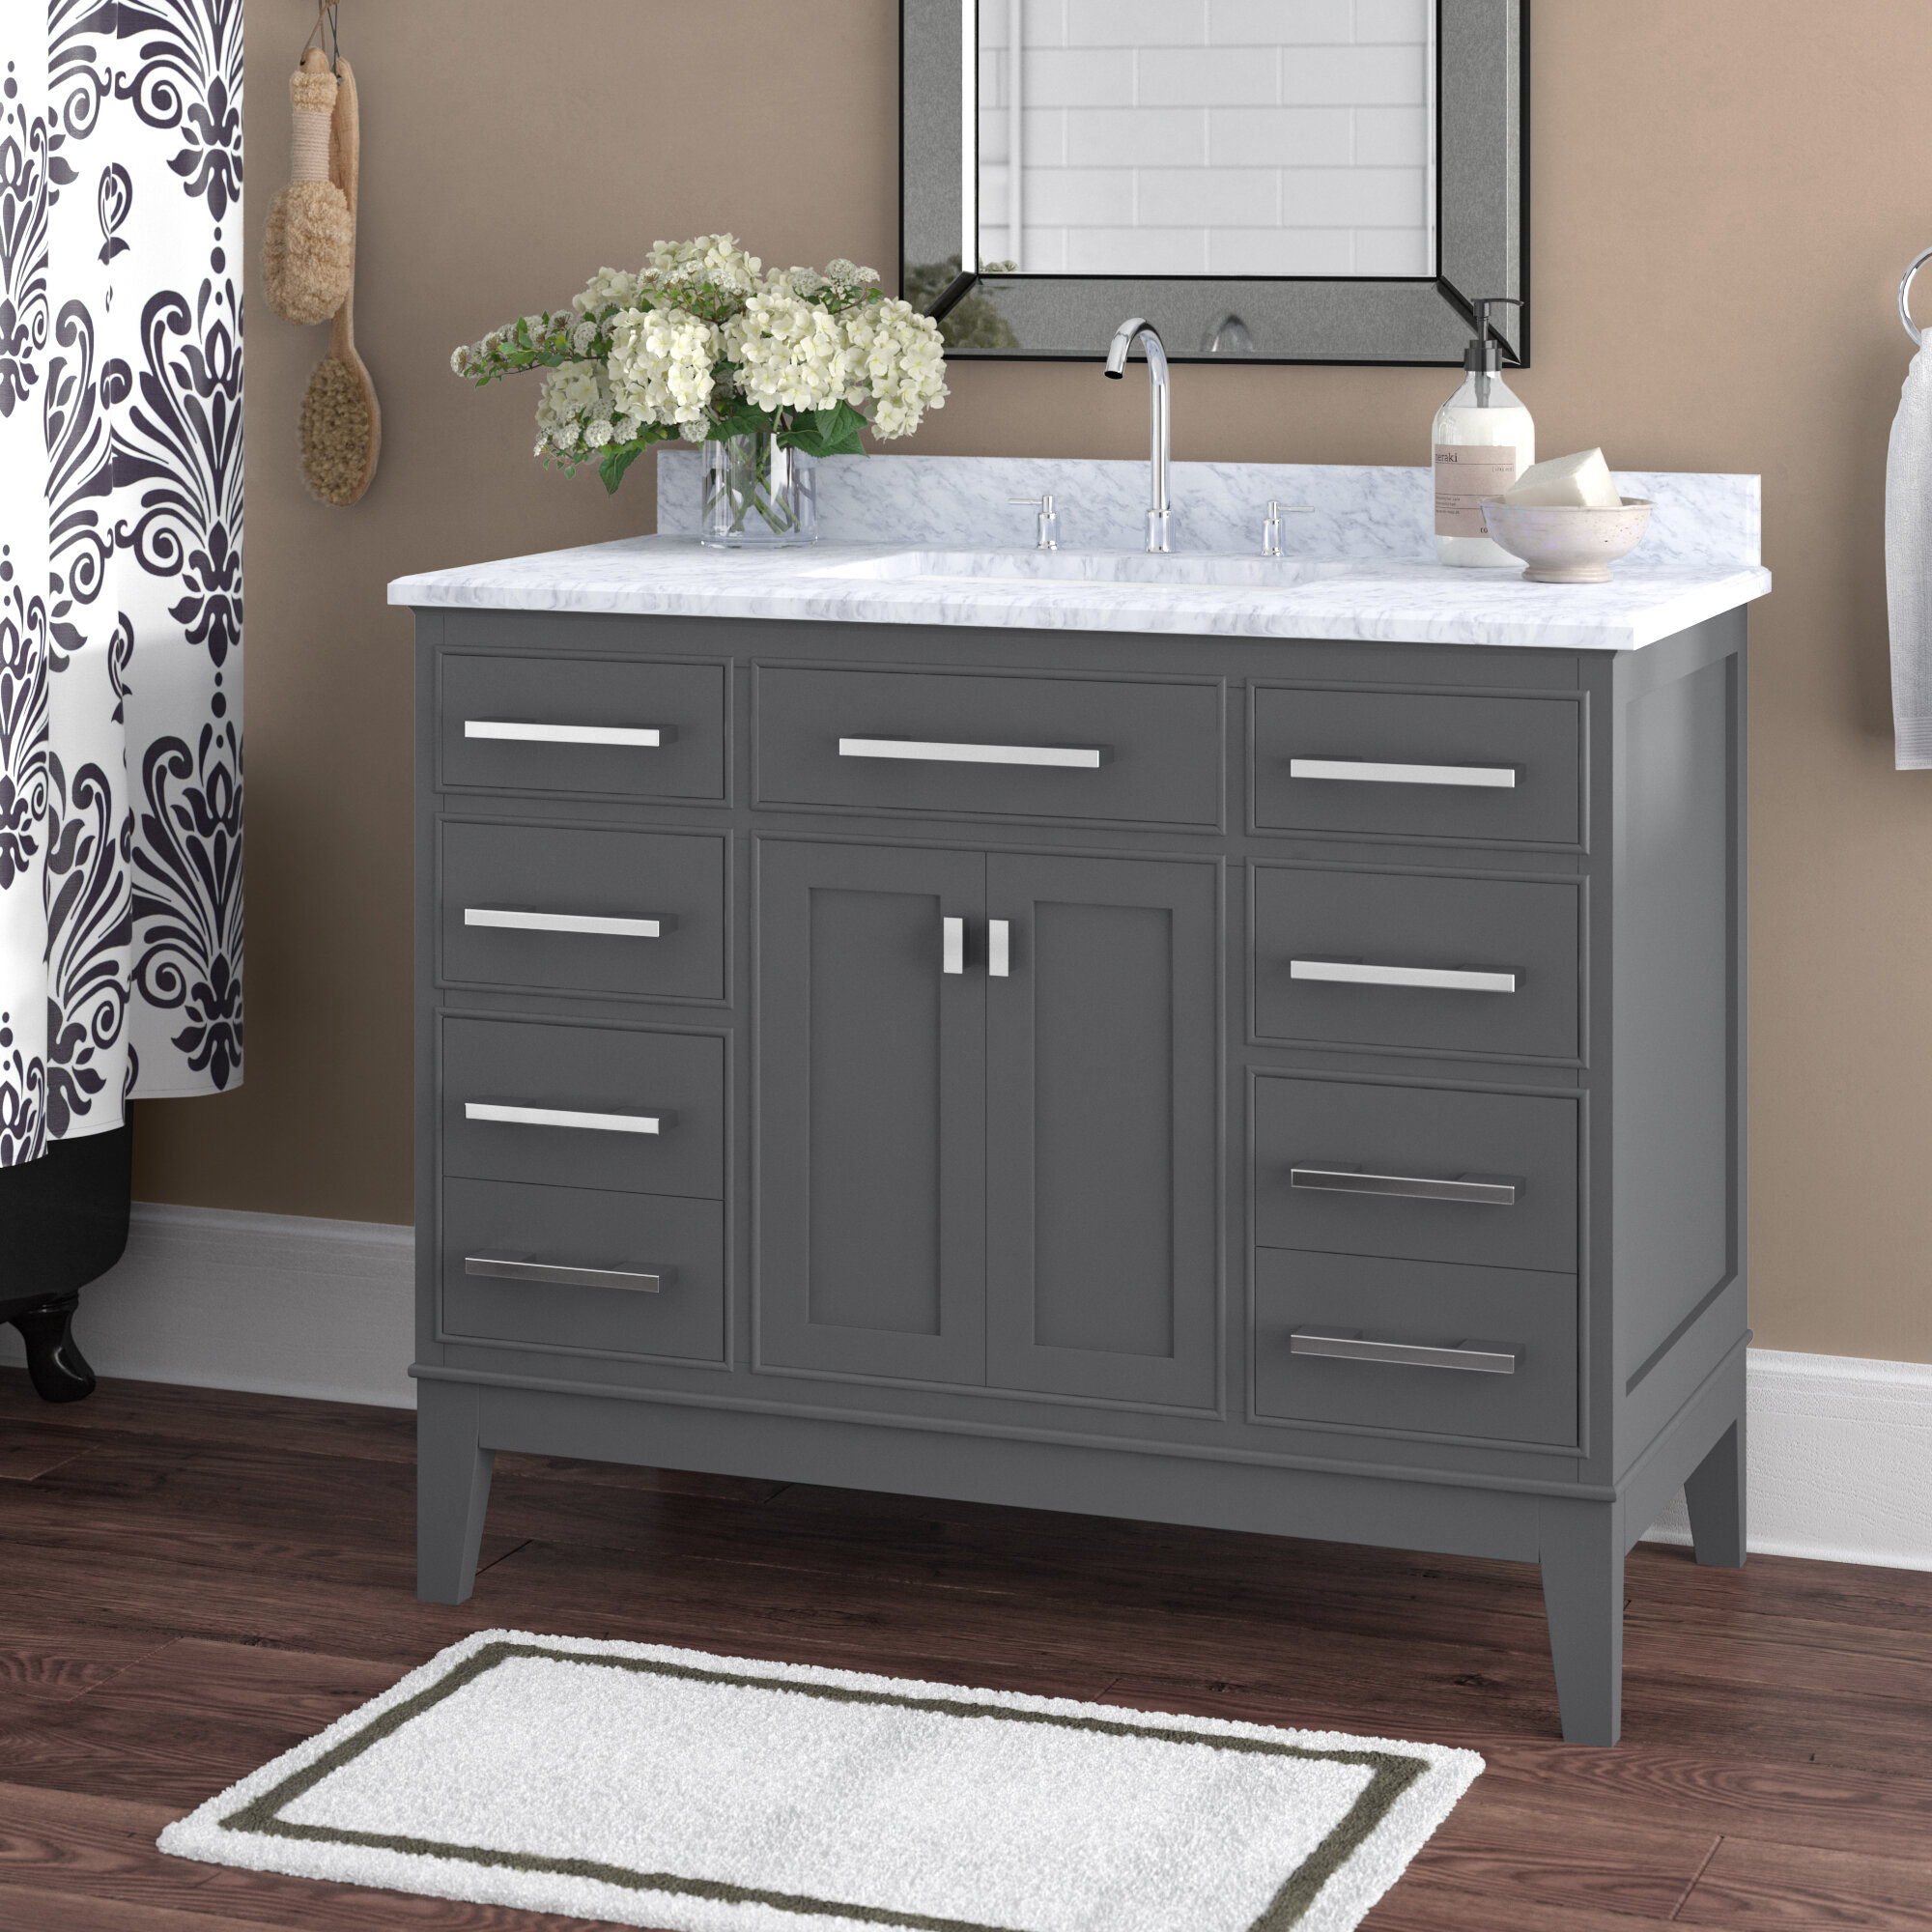 42 Inch Bathroom Vanity Clearance - How To Blog